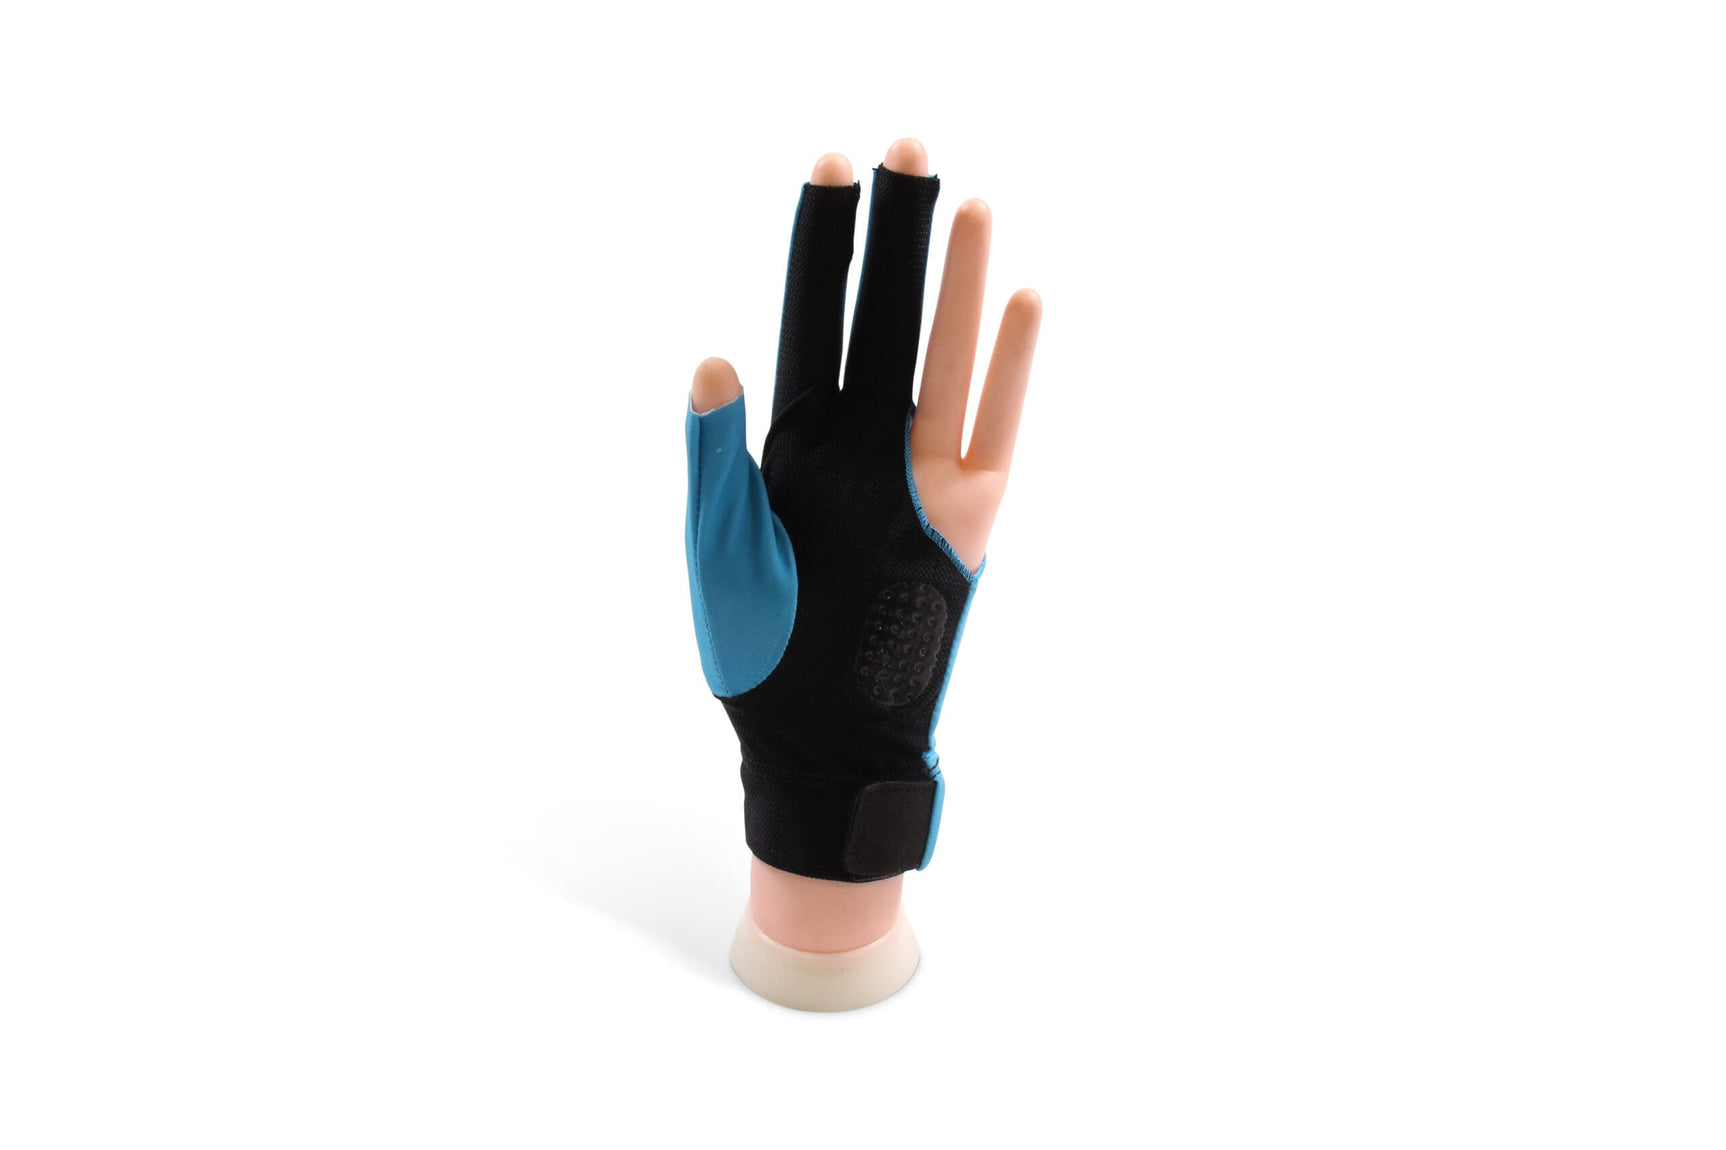 BAIZE MASTER Professional Three-Finger Snooker Pool Cueing Glove - For a Smoother Cue Action - Right Hand